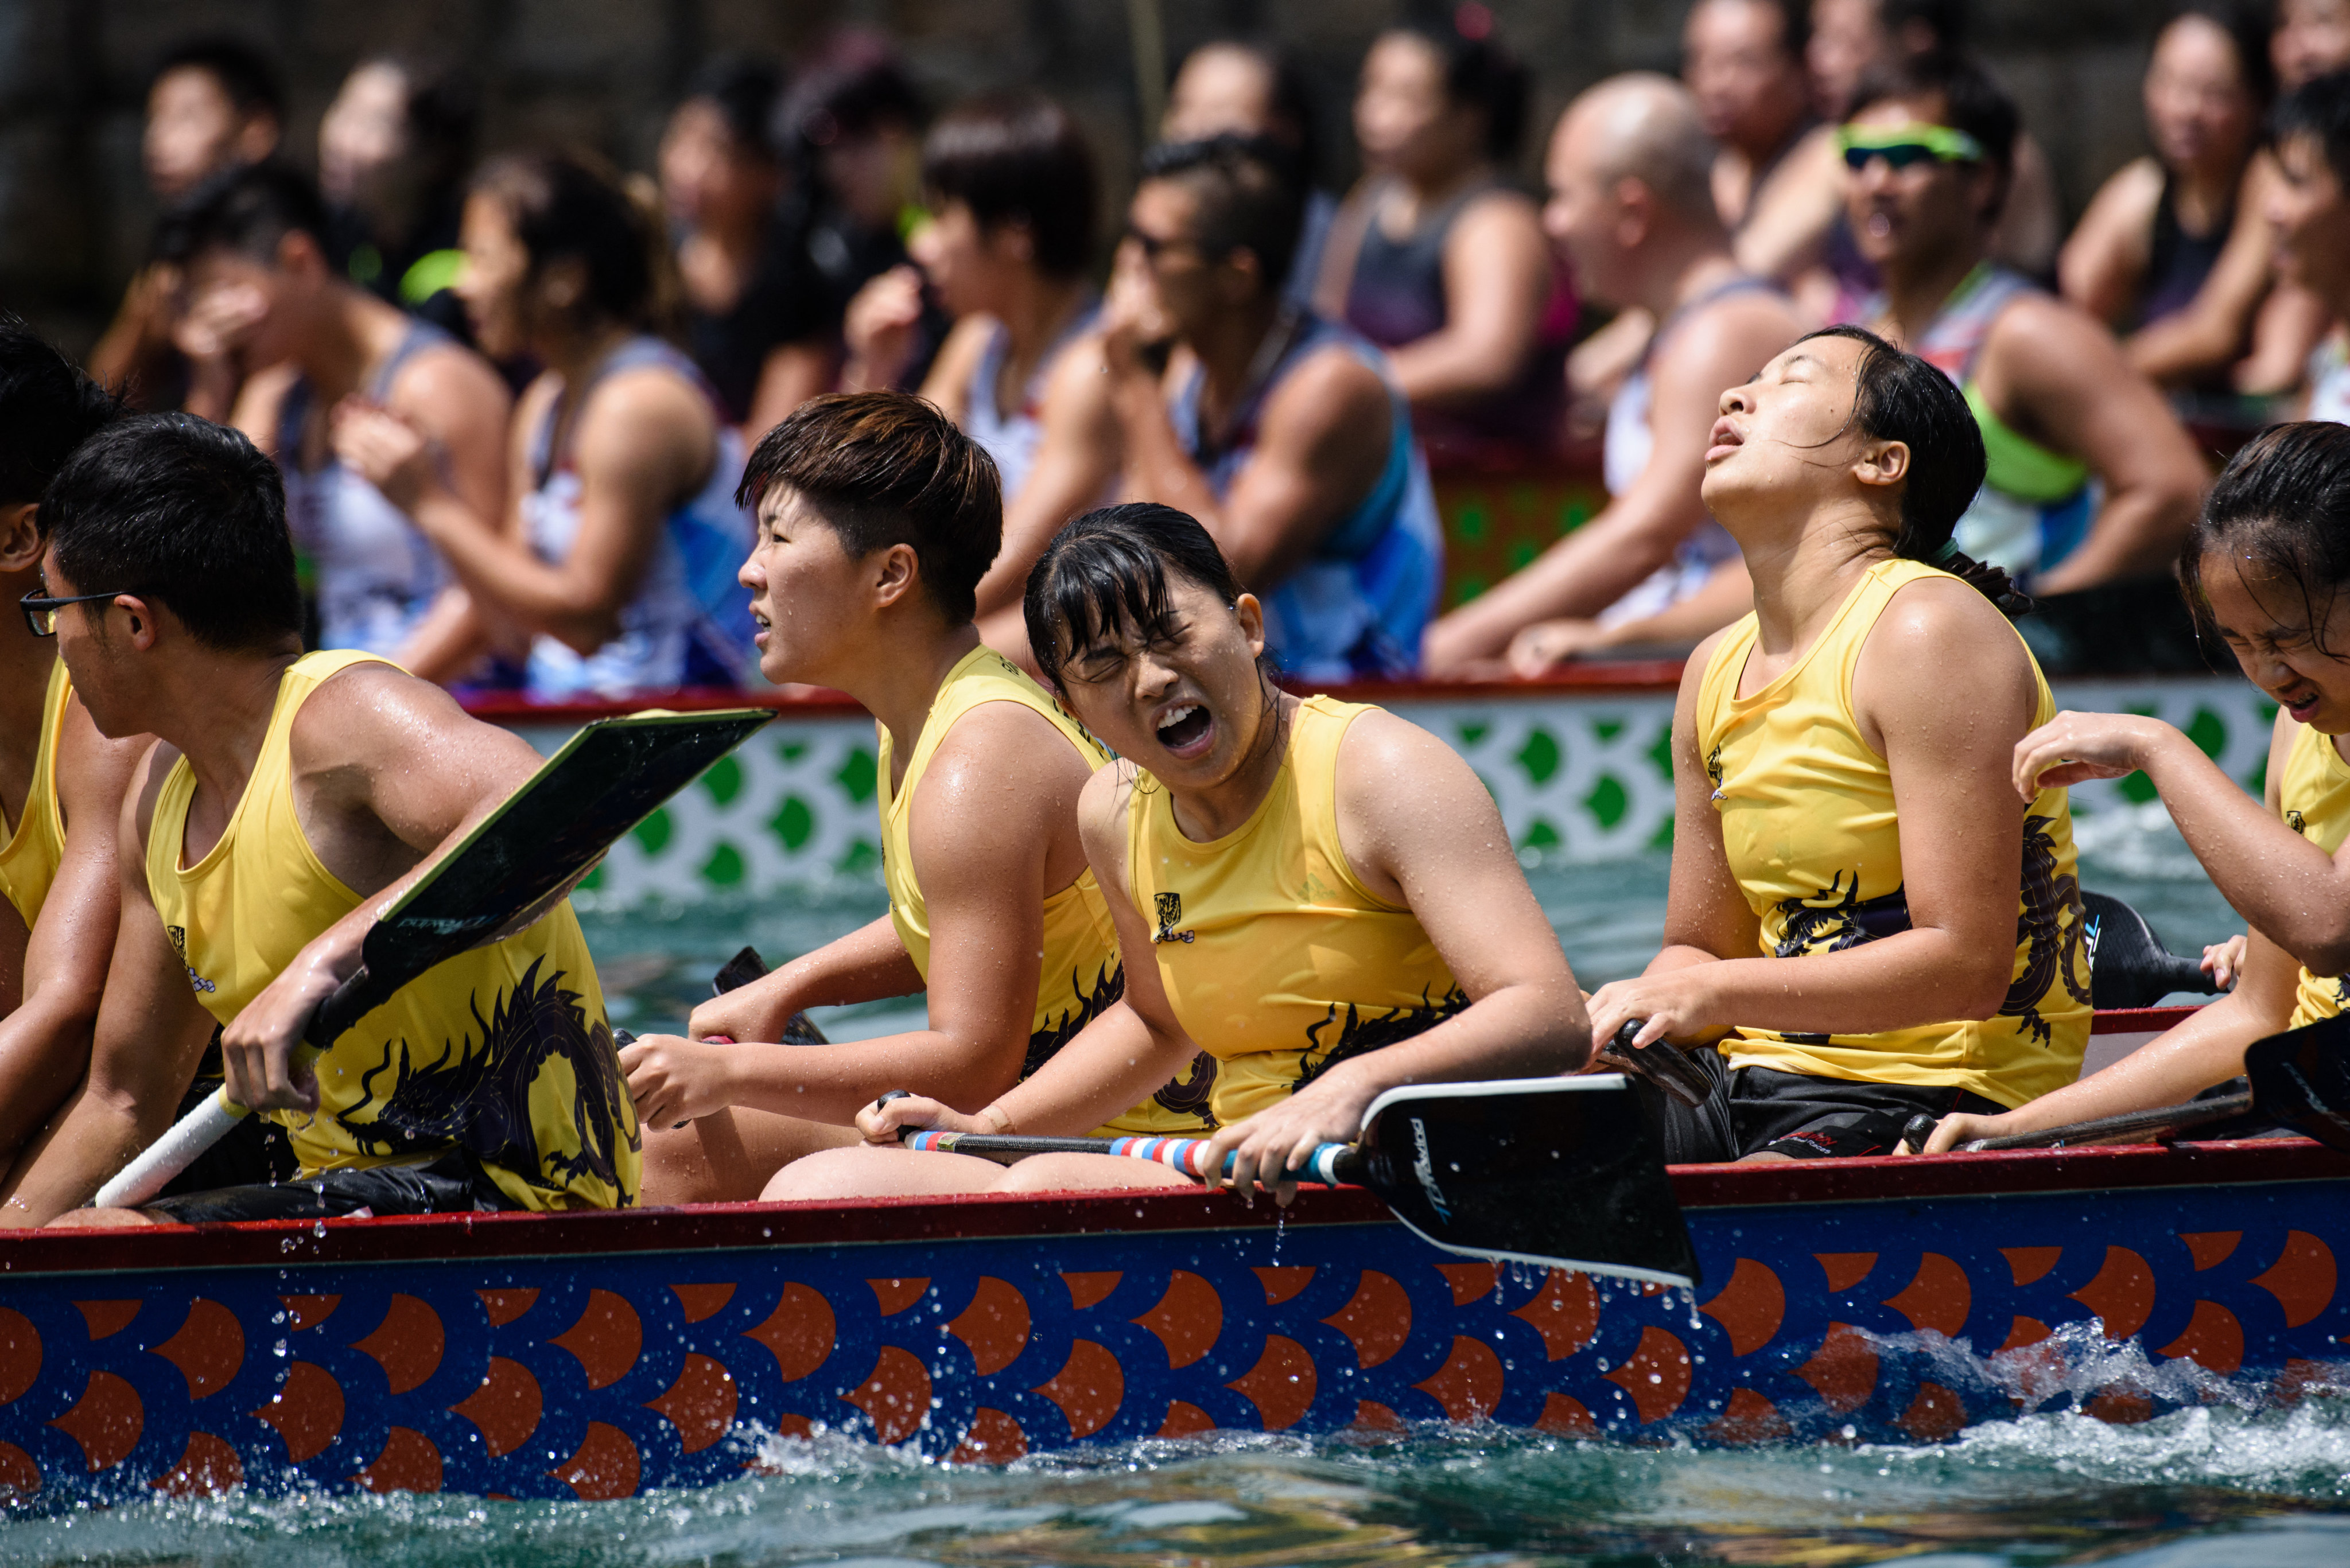 Competitors react as they take part in the annual dragon boat race held to celebrate the Tuen Ng festival in Hong Kong in 2017. Photo: AFP